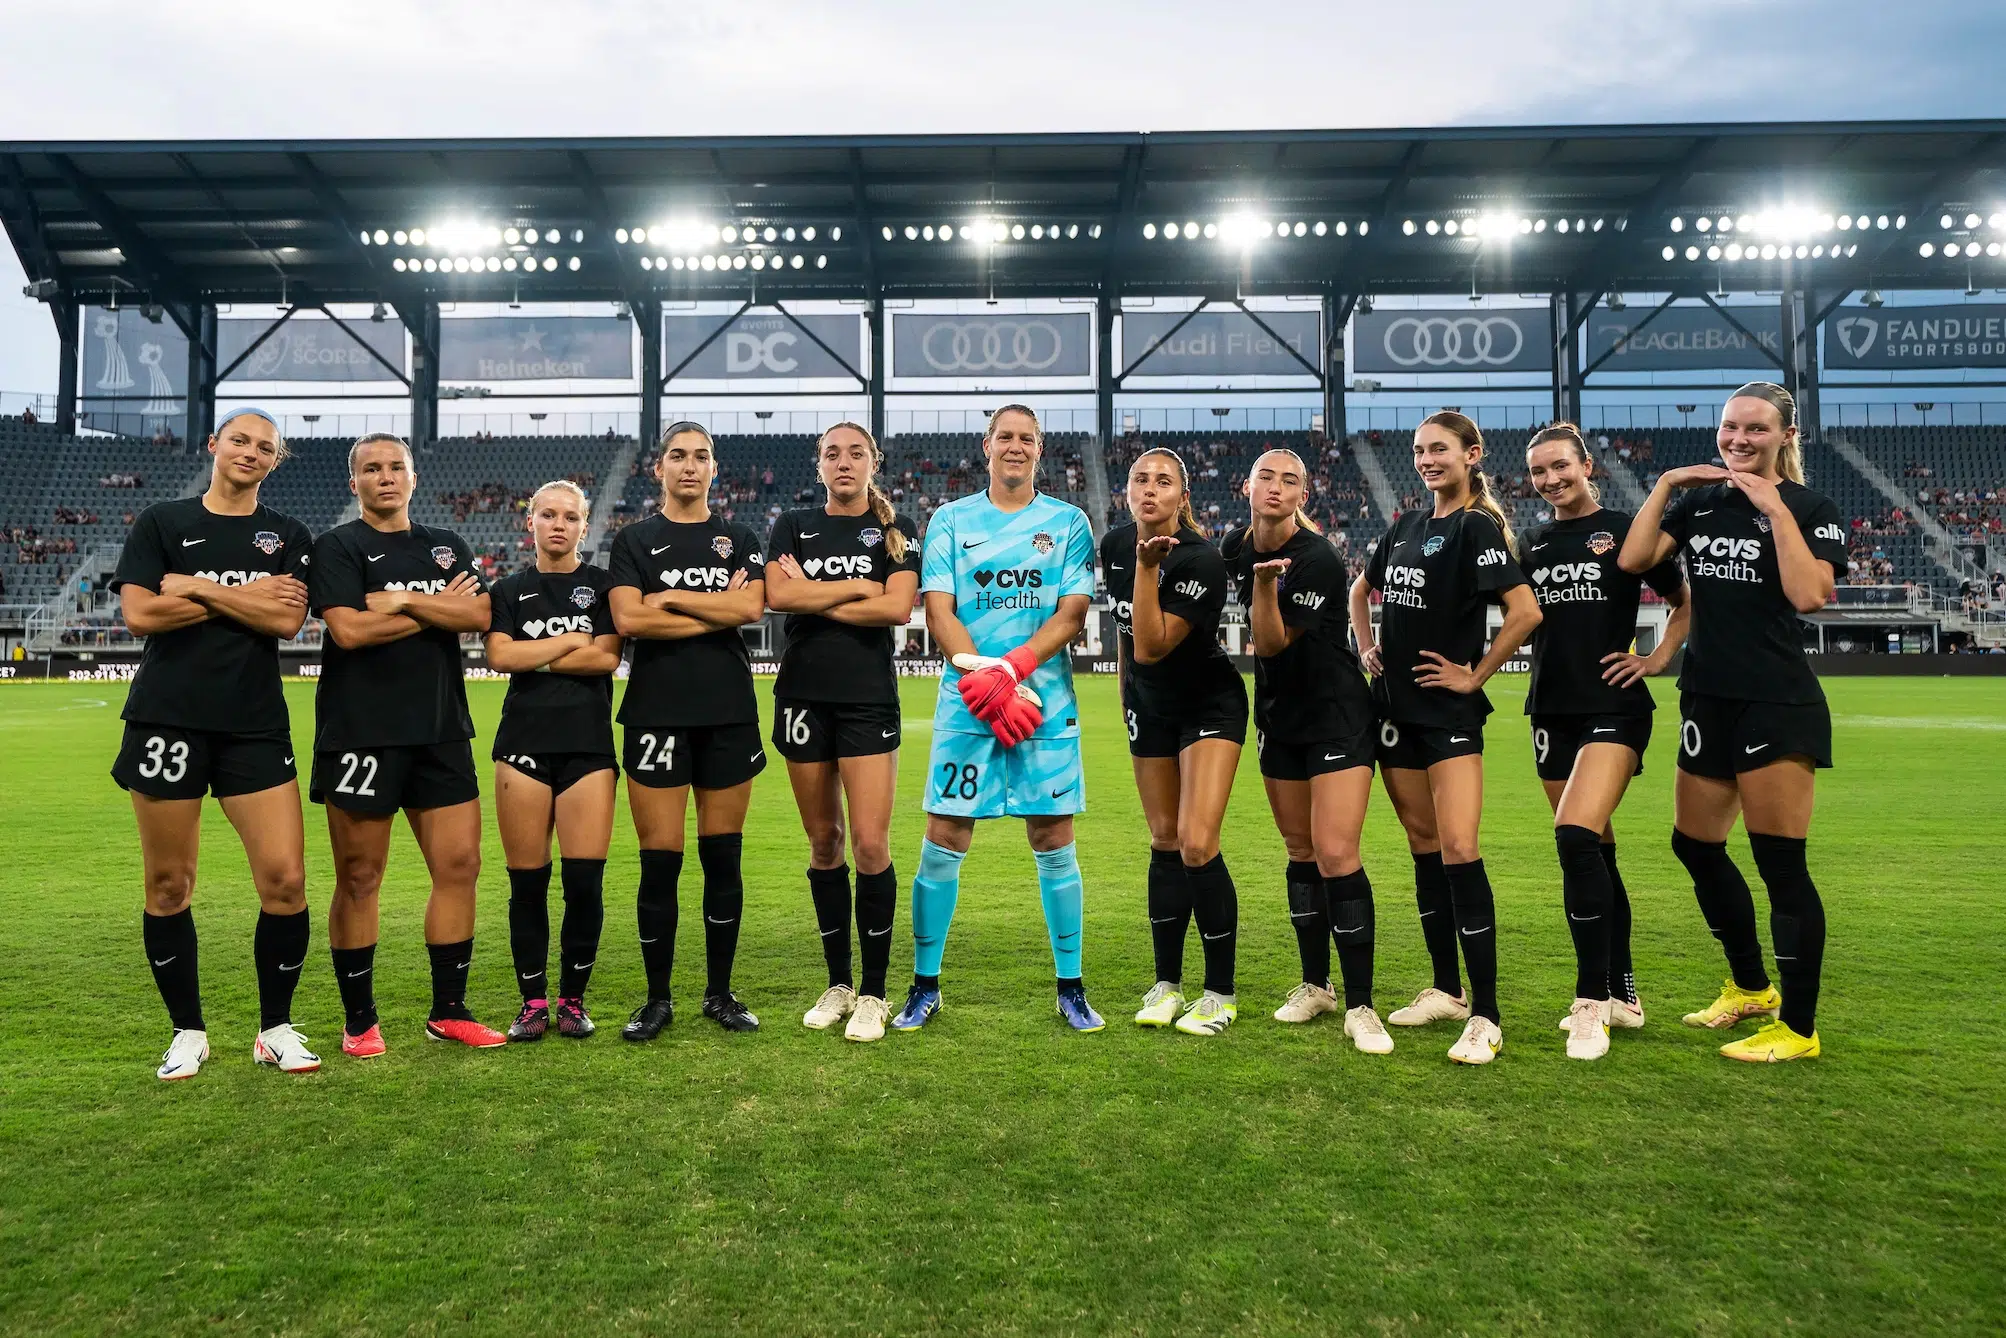 On the left side, Five soccer players in black uniforms stand with their arms crossed and have serious looks on their faces. On the right side, five more players in black blow kisses and pose with their hands on their hips smiling wide. In between the two groups, Nicole Barnhart wears a blue goalie uniform and red gloves.